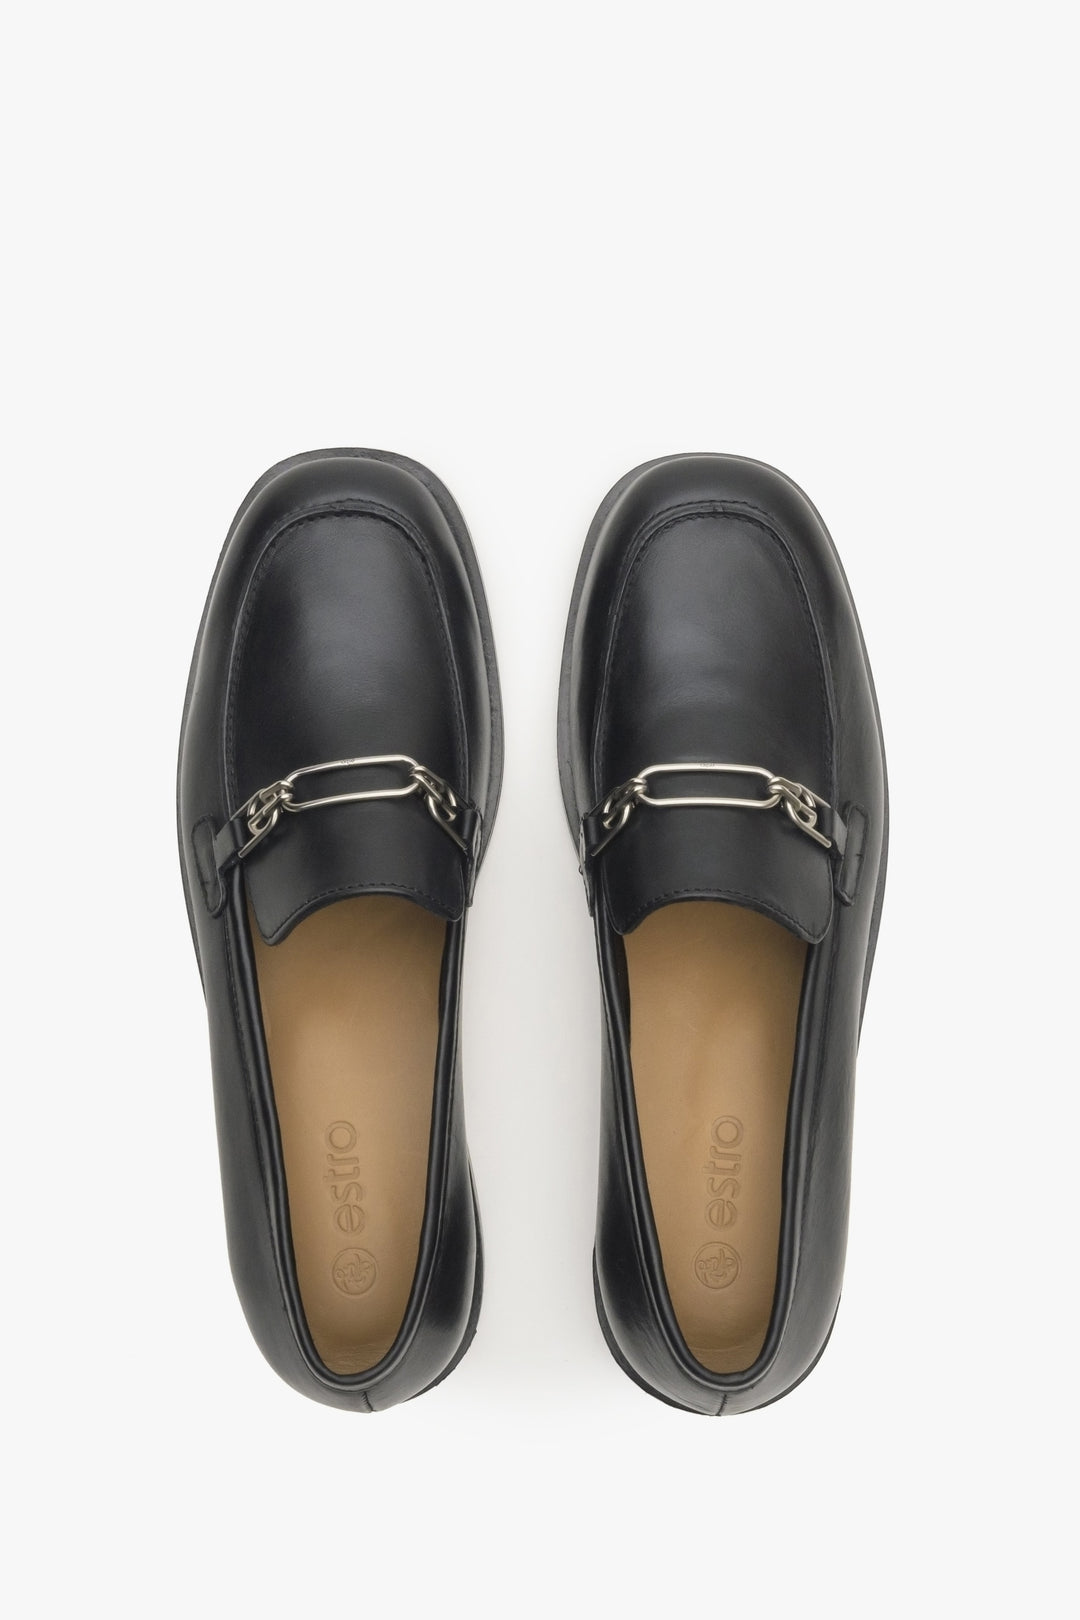 Women's black leather penny loafers - presentation from above.